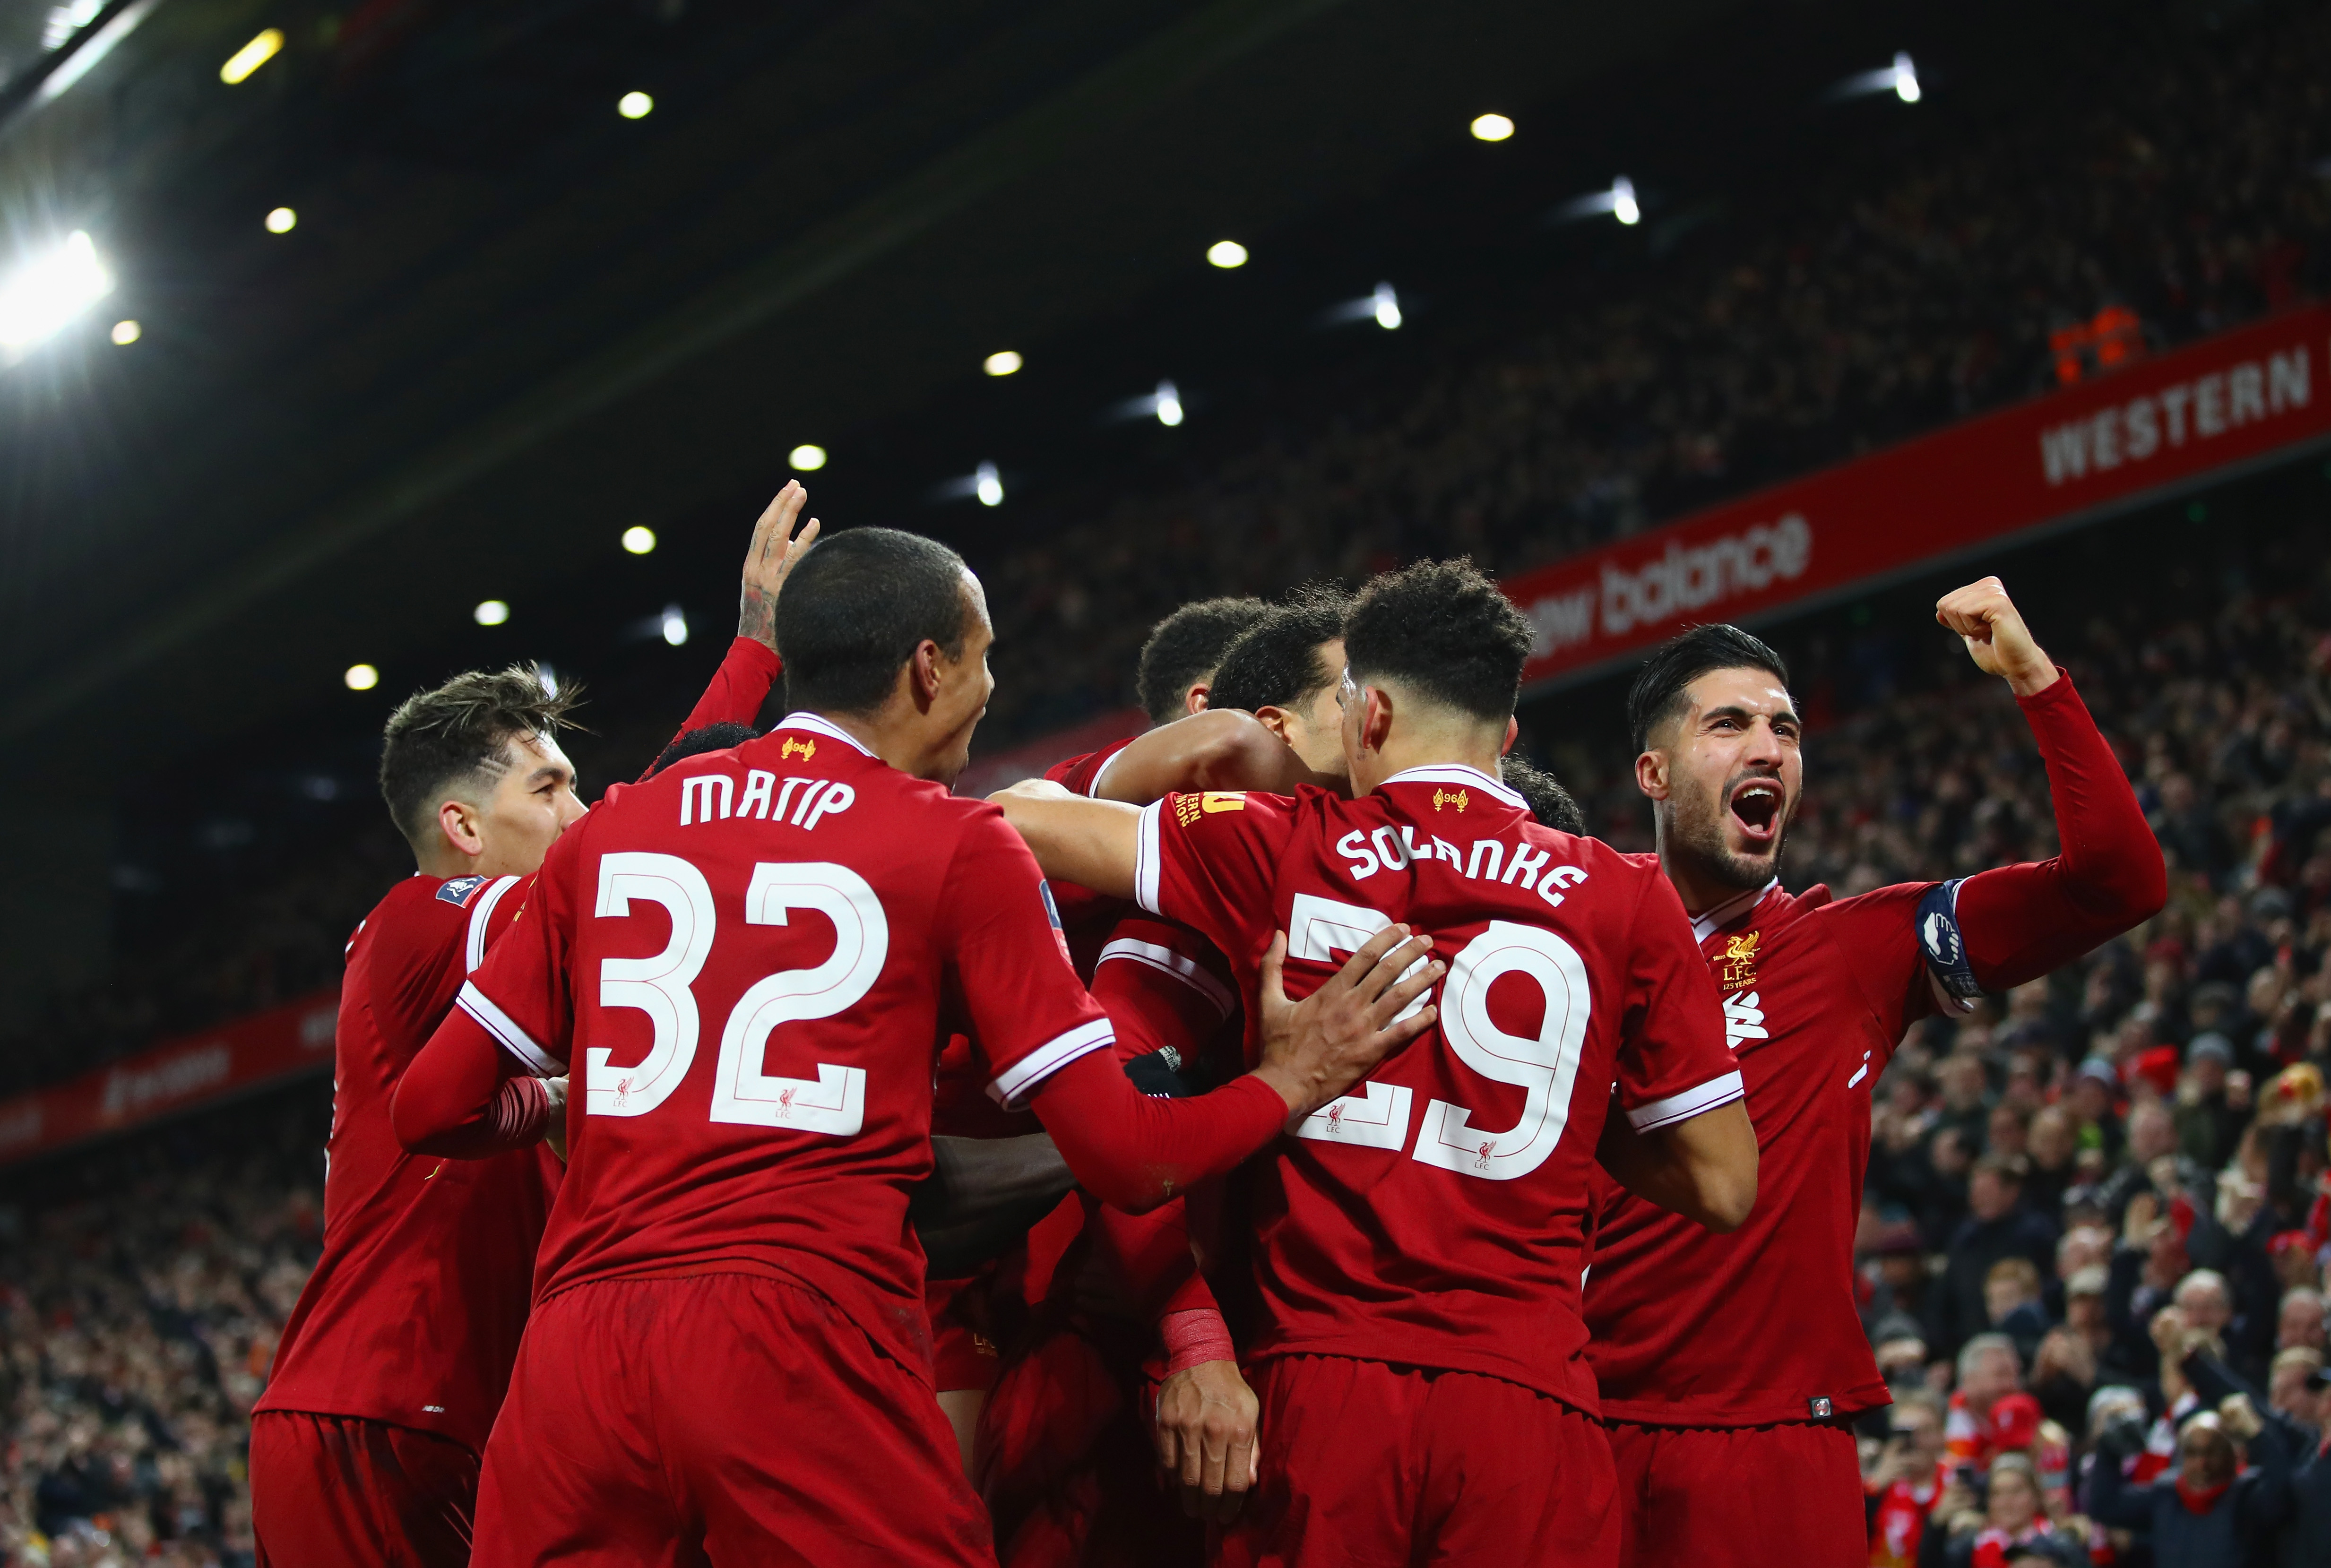 LIVERPOOL, ENGLAND - JANUARY 05:  Emre Can of Liverpool (R) and team mates congratulate Virgil van Dijk of Liverpool (obscured) as he scores their second goal during the Emirates FA Cup Third Round match between Liverpool and Everton at Anfield on January 5, 2018 in Liverpool, England.  (Photo by Clive Brunskill/Getty Images)